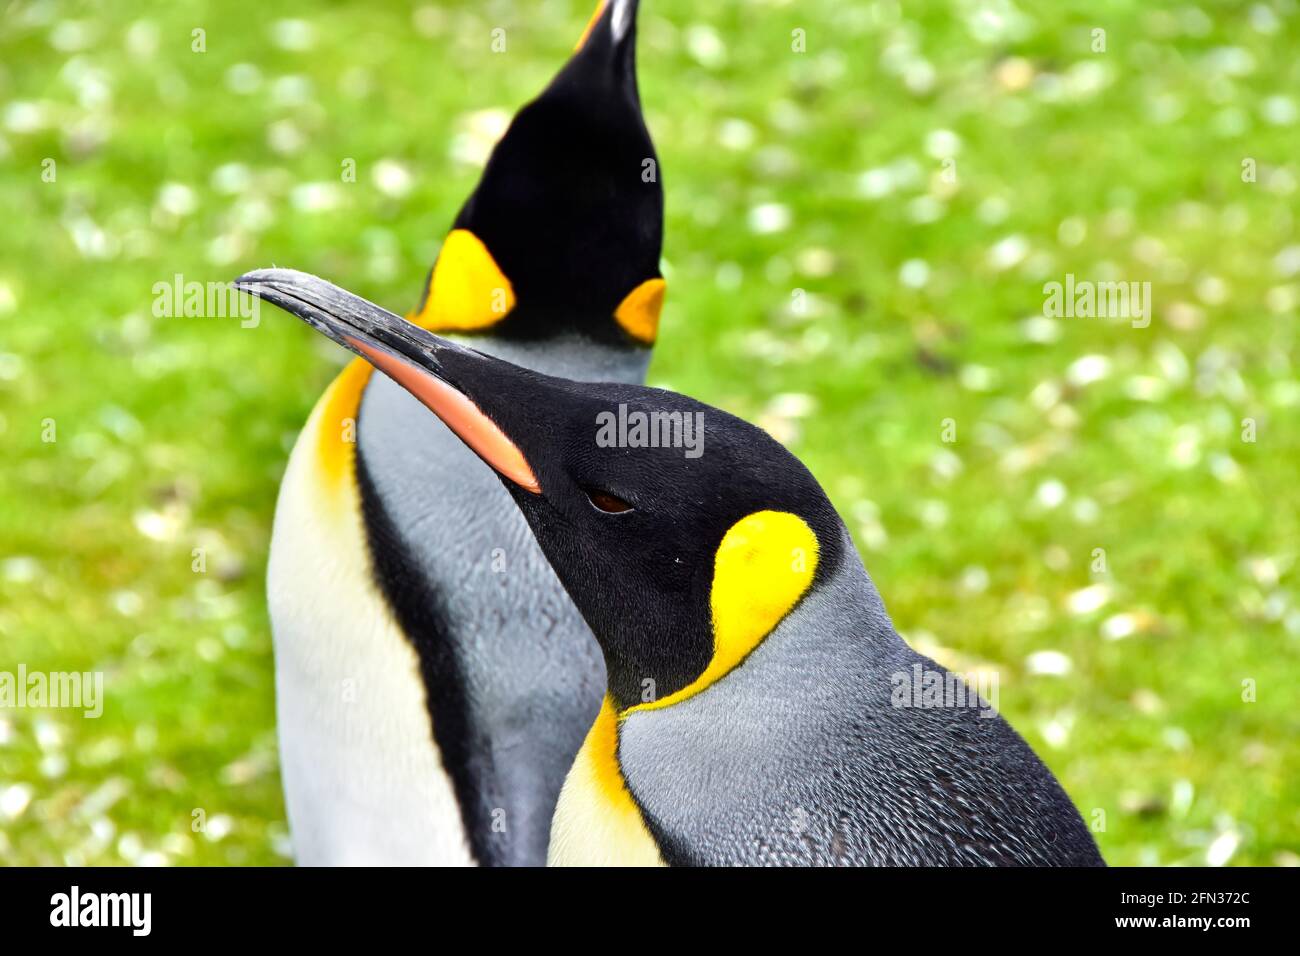 Two King Penguins at Volunteer Point, Falkland Islands. Stock Photo